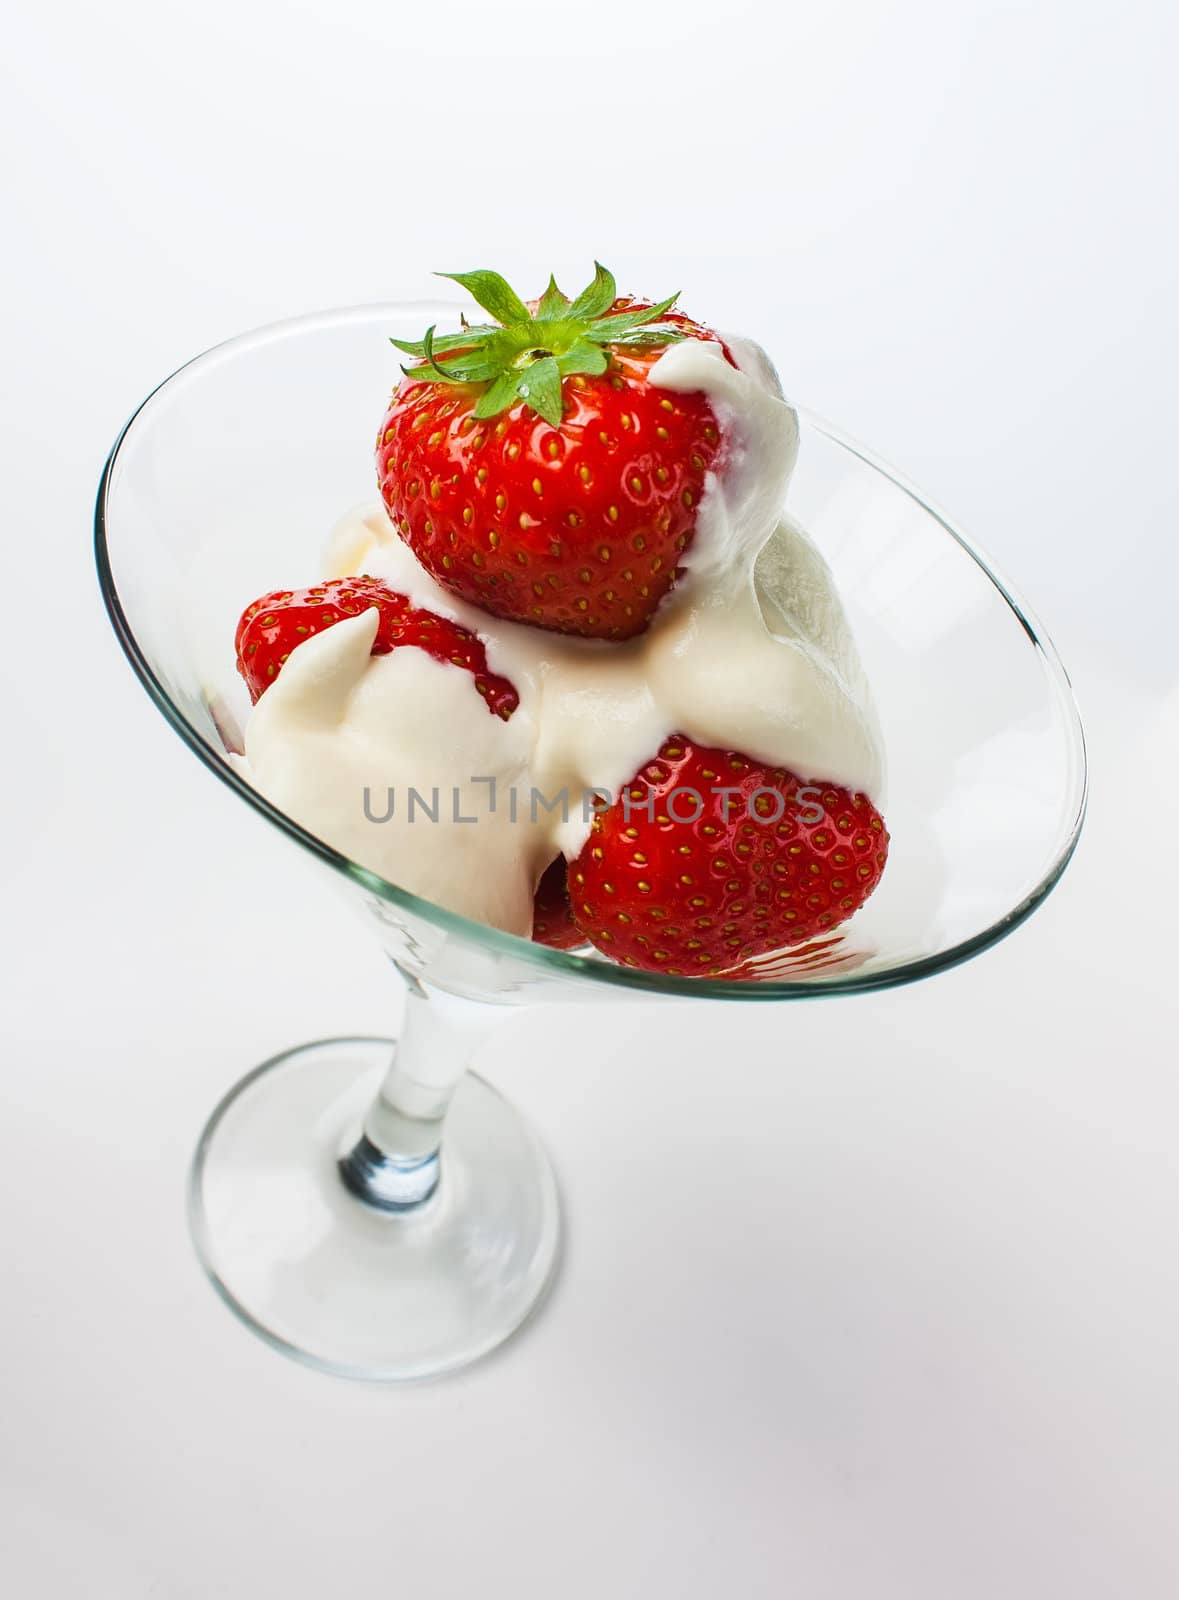 strawberries and cream in a glass on a white background by oleg_zhukov